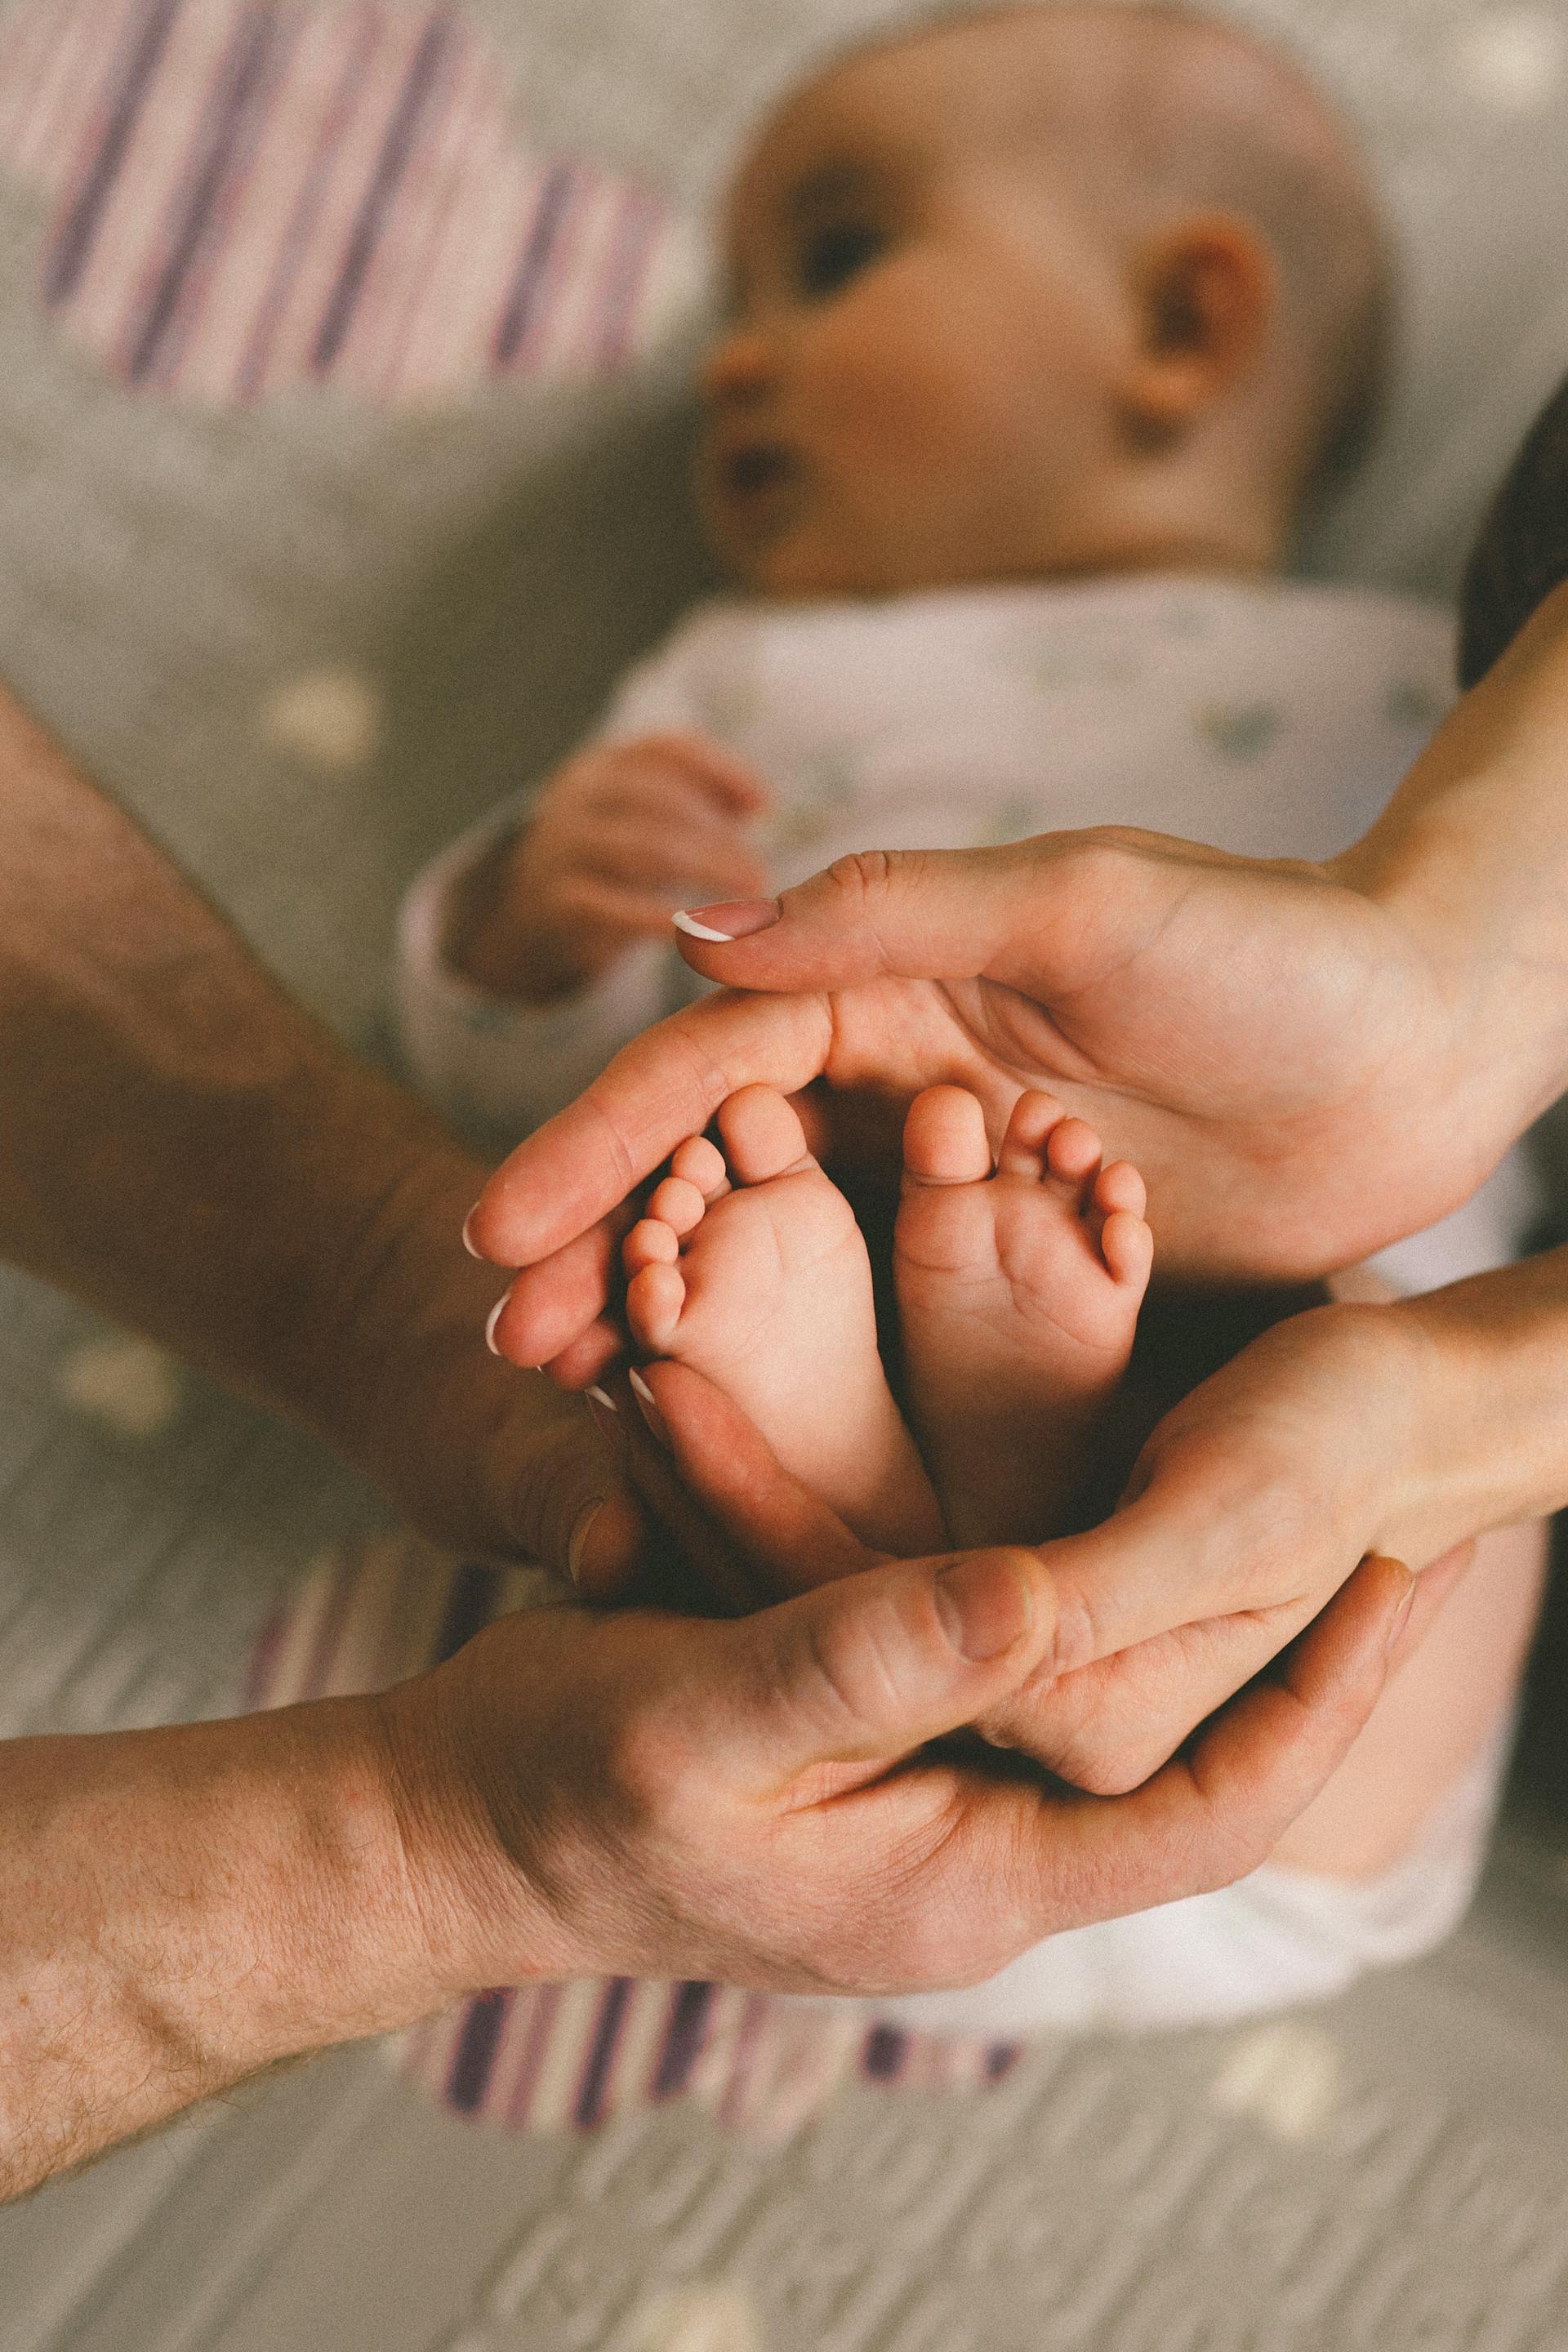 A couple with a cute little baby | Source: Pexels